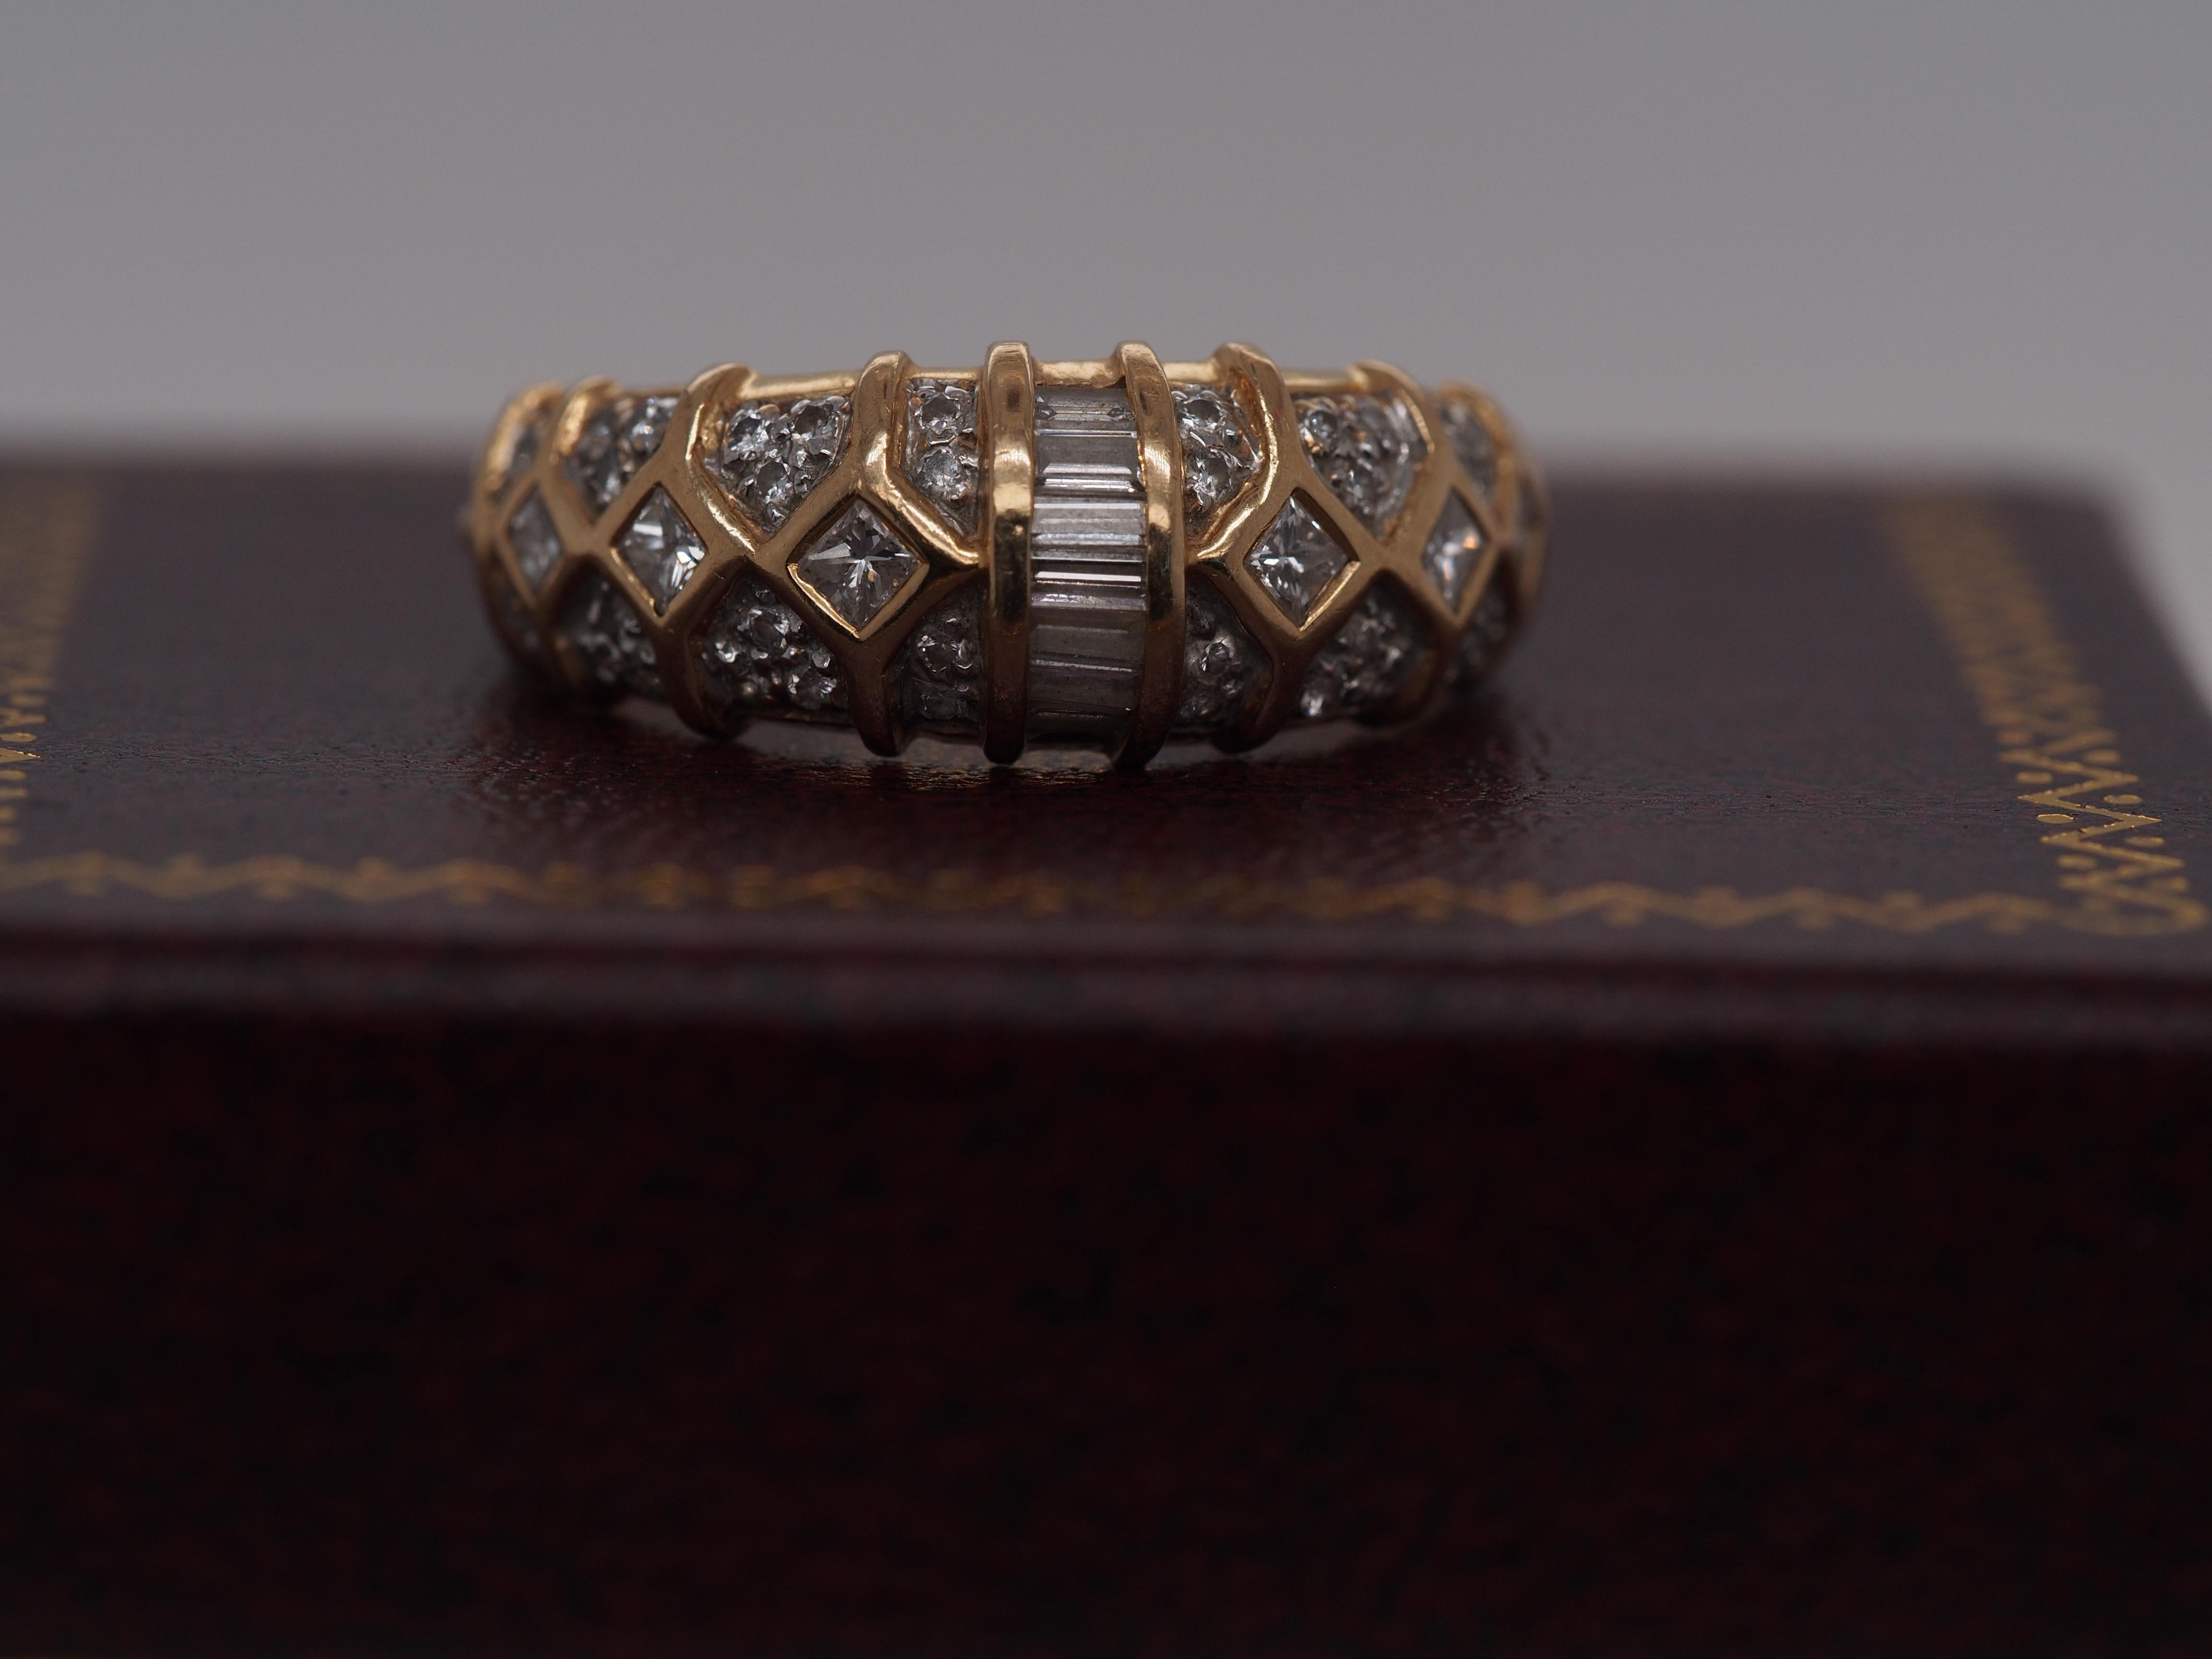 Item Details:
Ring Size: 8.5
Metal Type: 14k Yellow Gold [Hallmarked, and Tested]
Weight: 4.1 grams
Diamond Details: .75ct total weight, Natural Diamonds, G-H Color, VS & SI Clarity.
Band Width: 3.5mm
Condition: Excellent